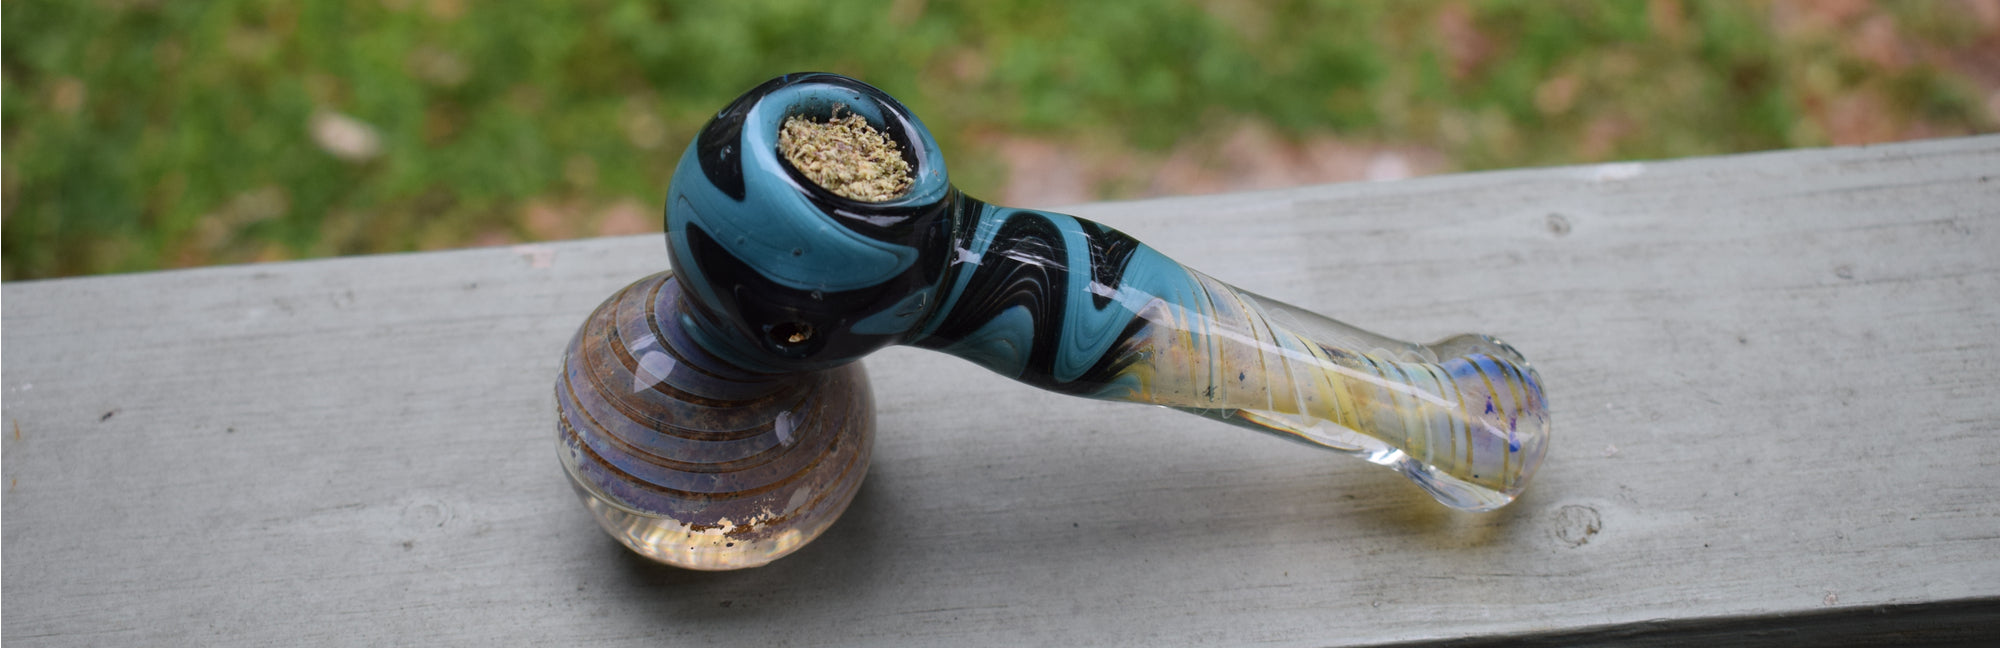 How to Use a Bubbler